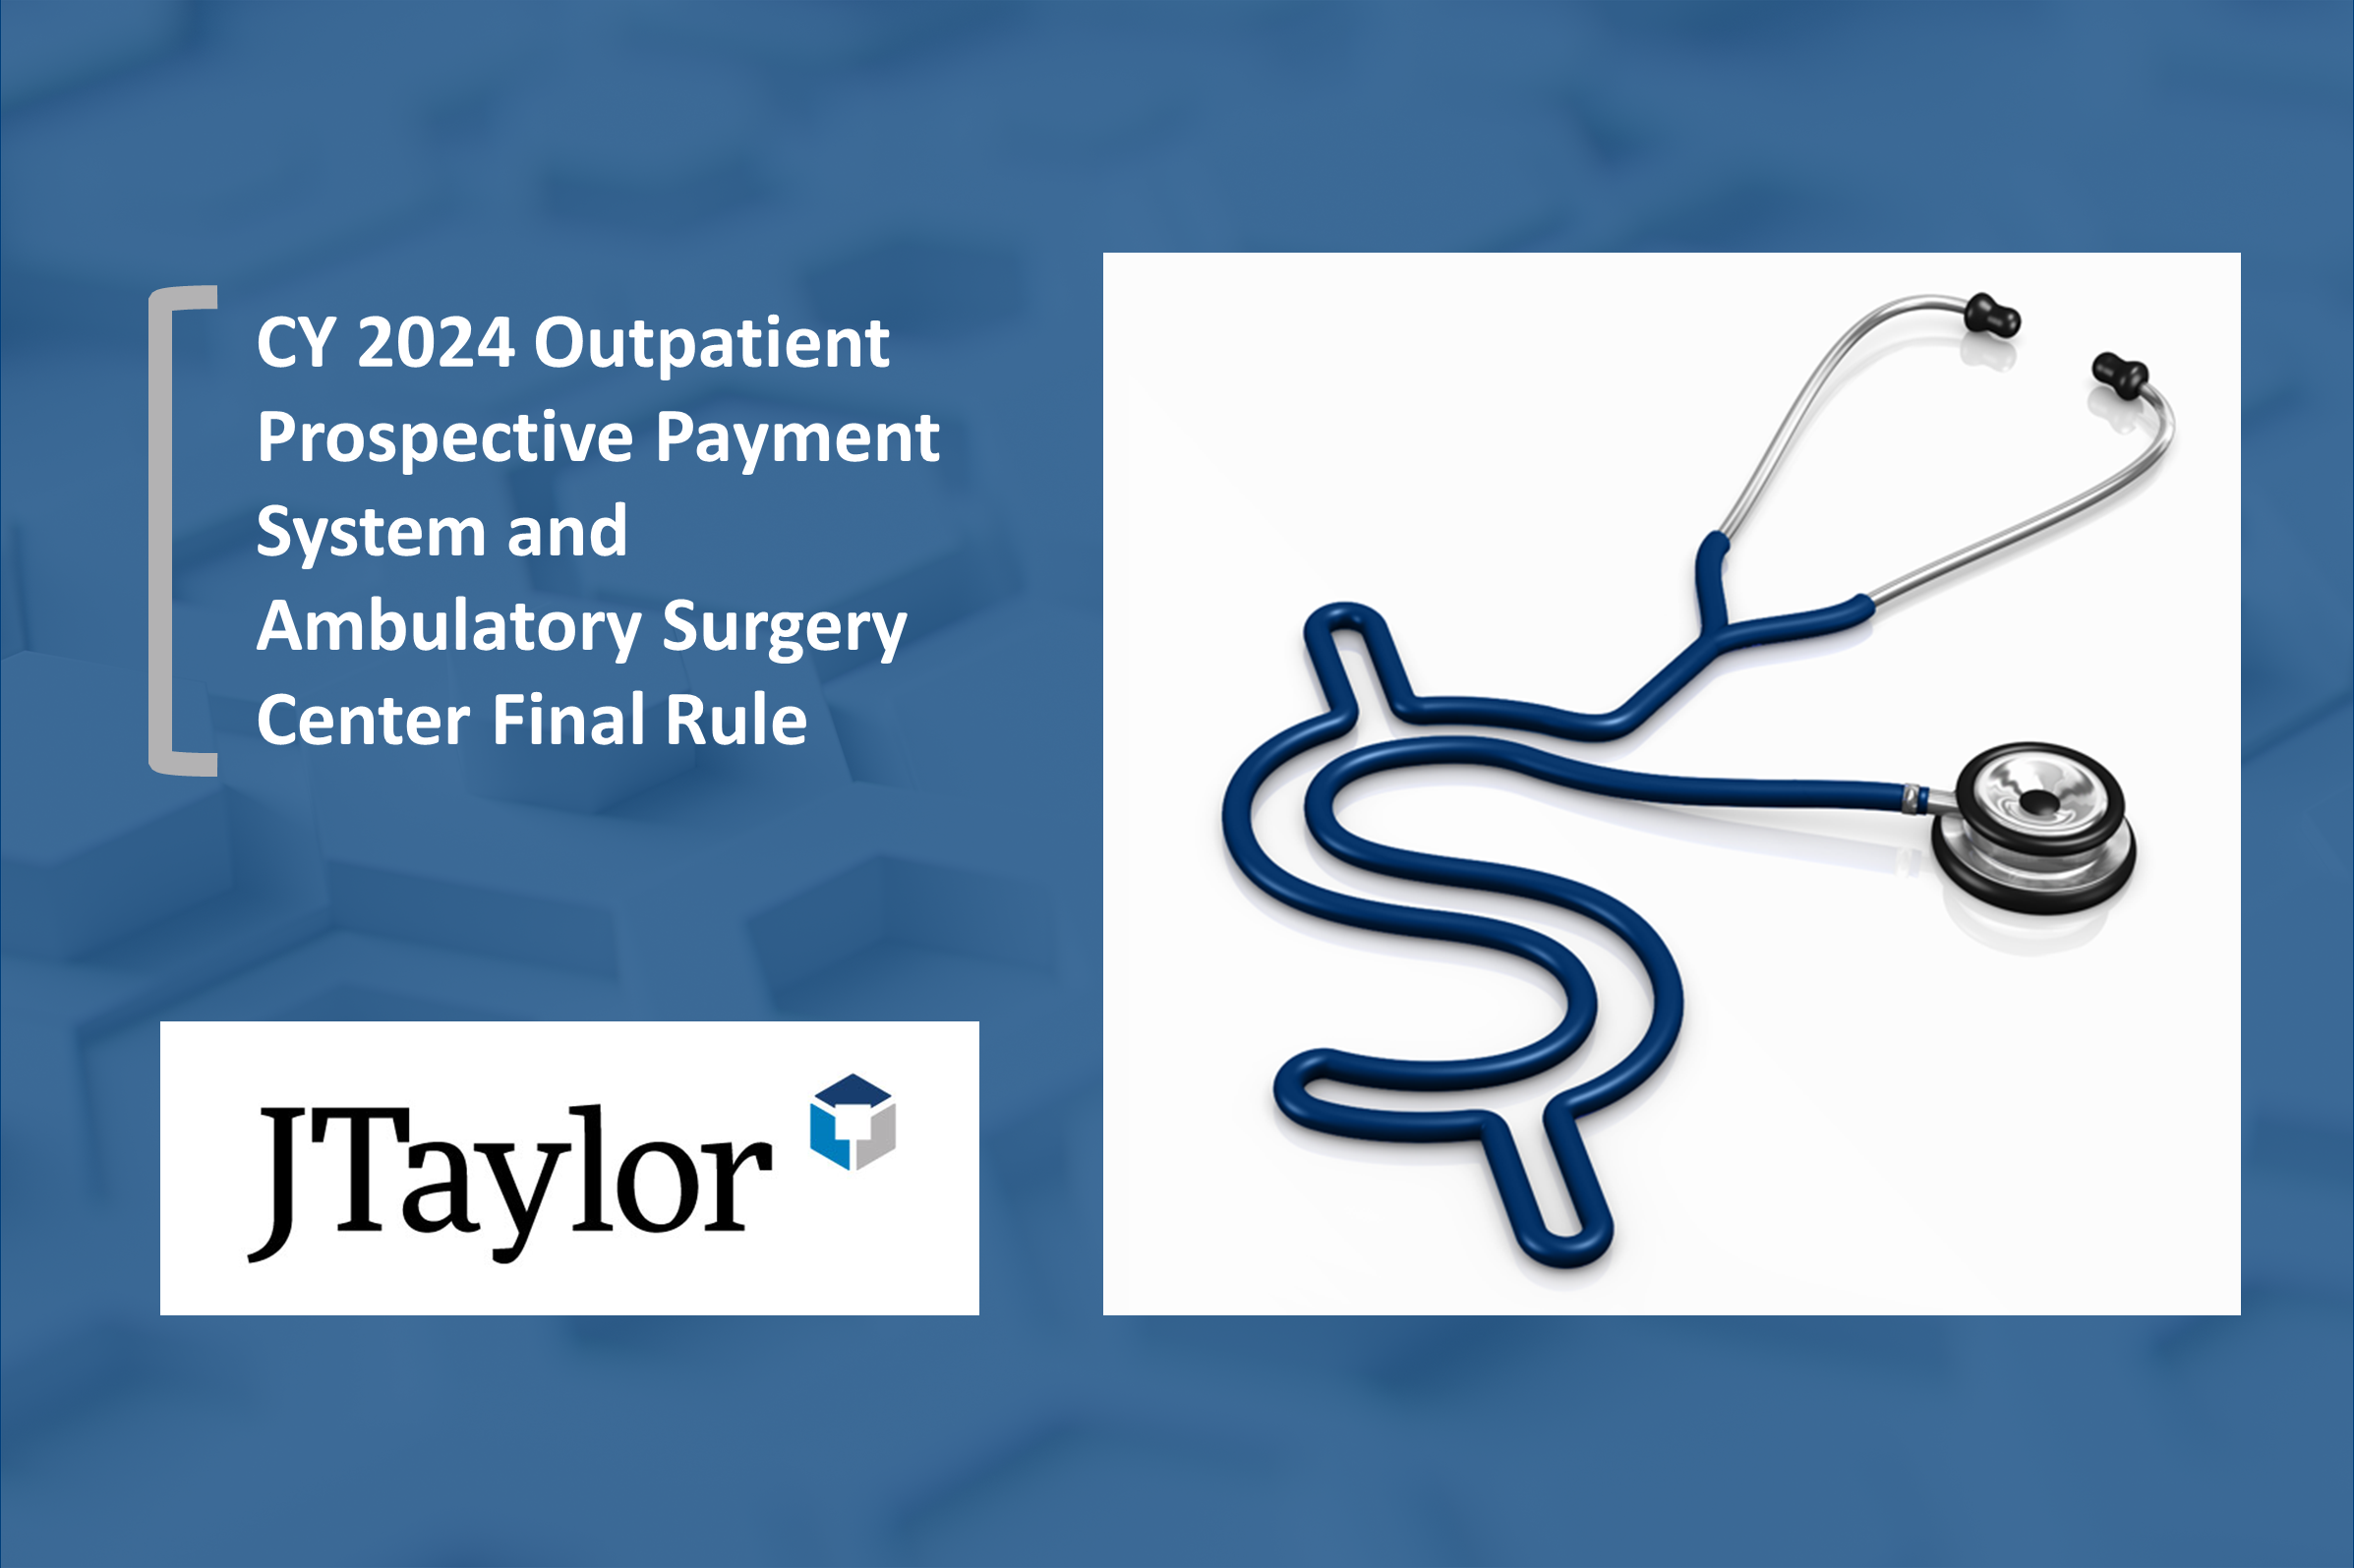 CY 2025 Outpatient Prospective Payment System and Ambulatory Surgery Center Payment System Proposed Rule